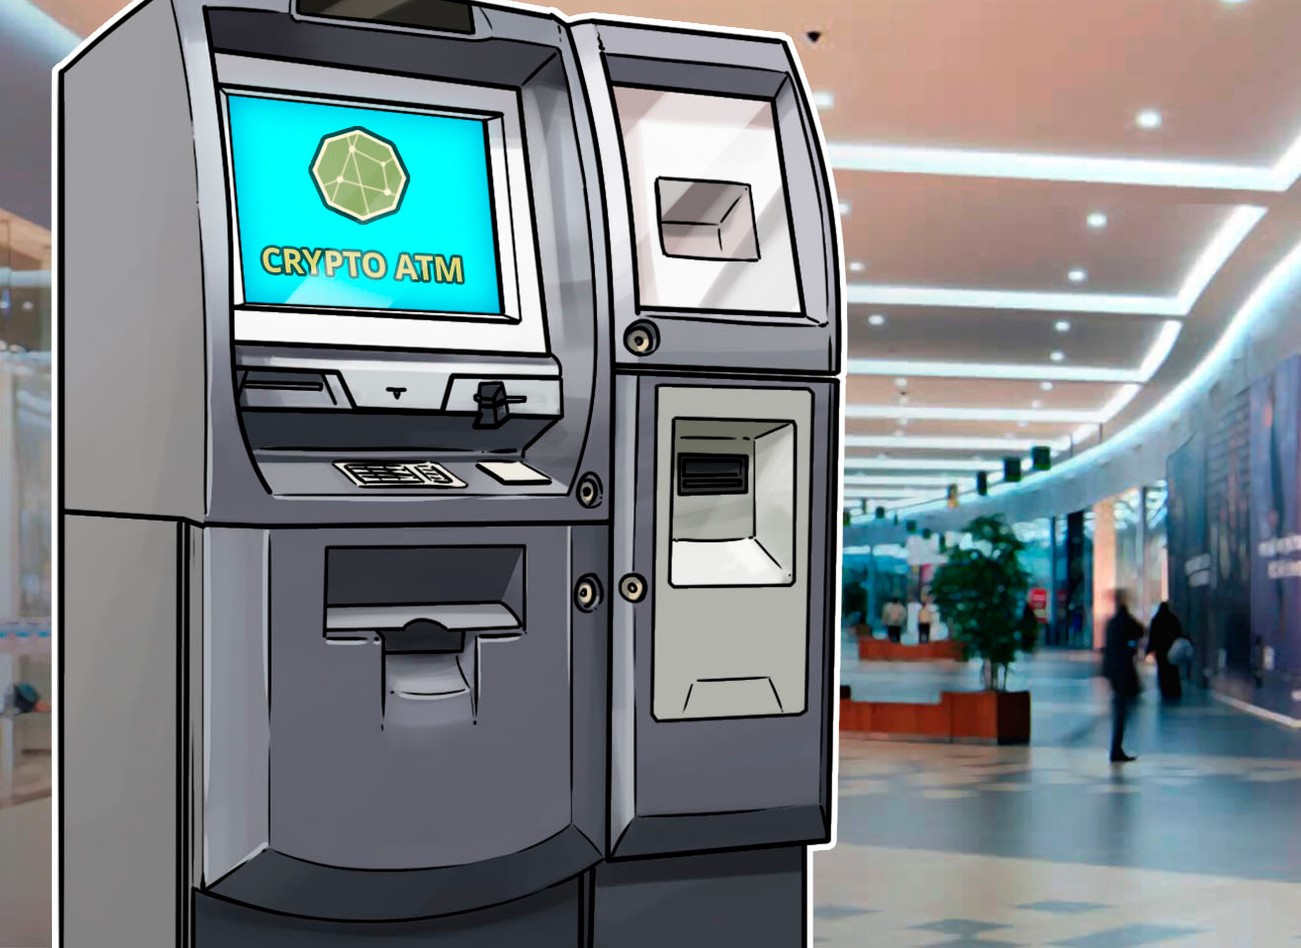 Cryptocurrency ATM installations worldwide drop by 90%, marking a downward trend until May 2022